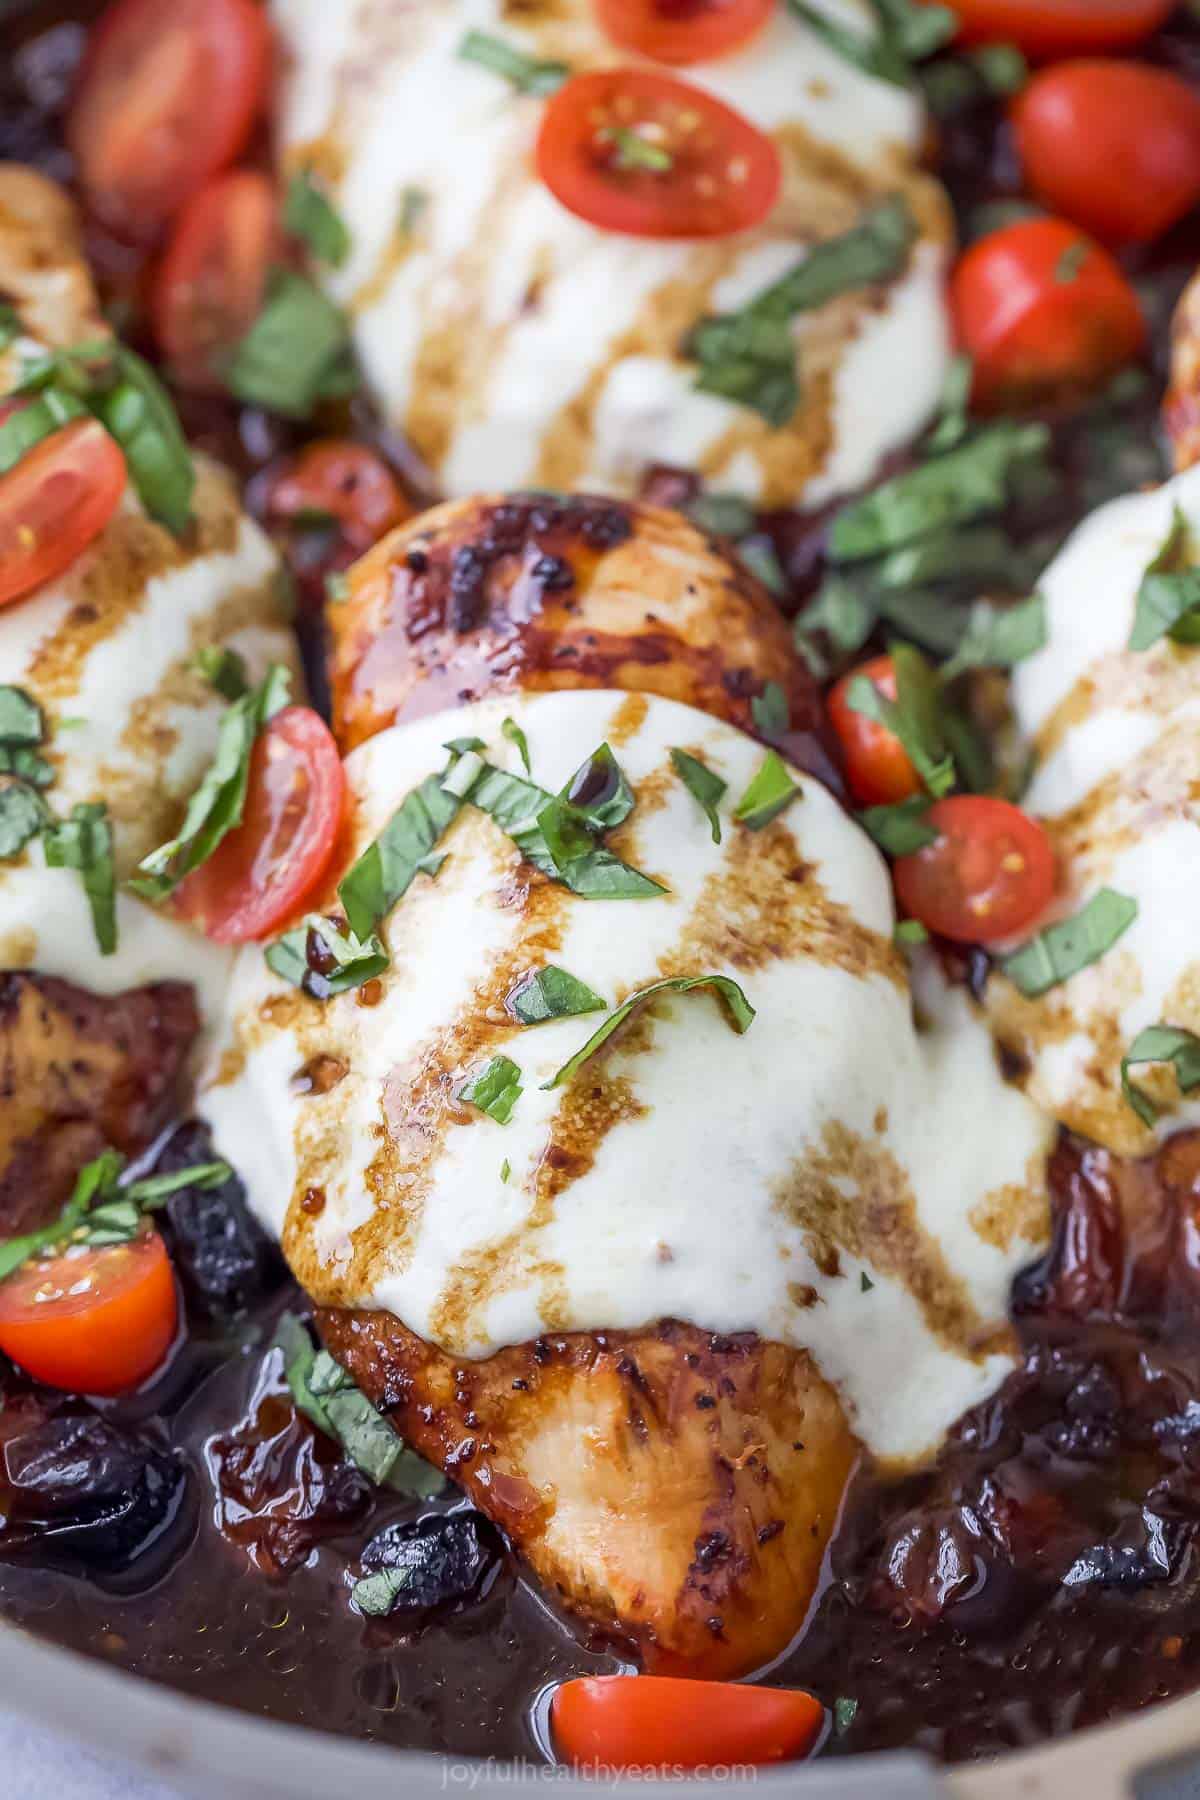 Juicy chicken topped with cherry tomatoes, mozzarella cheese and basil.